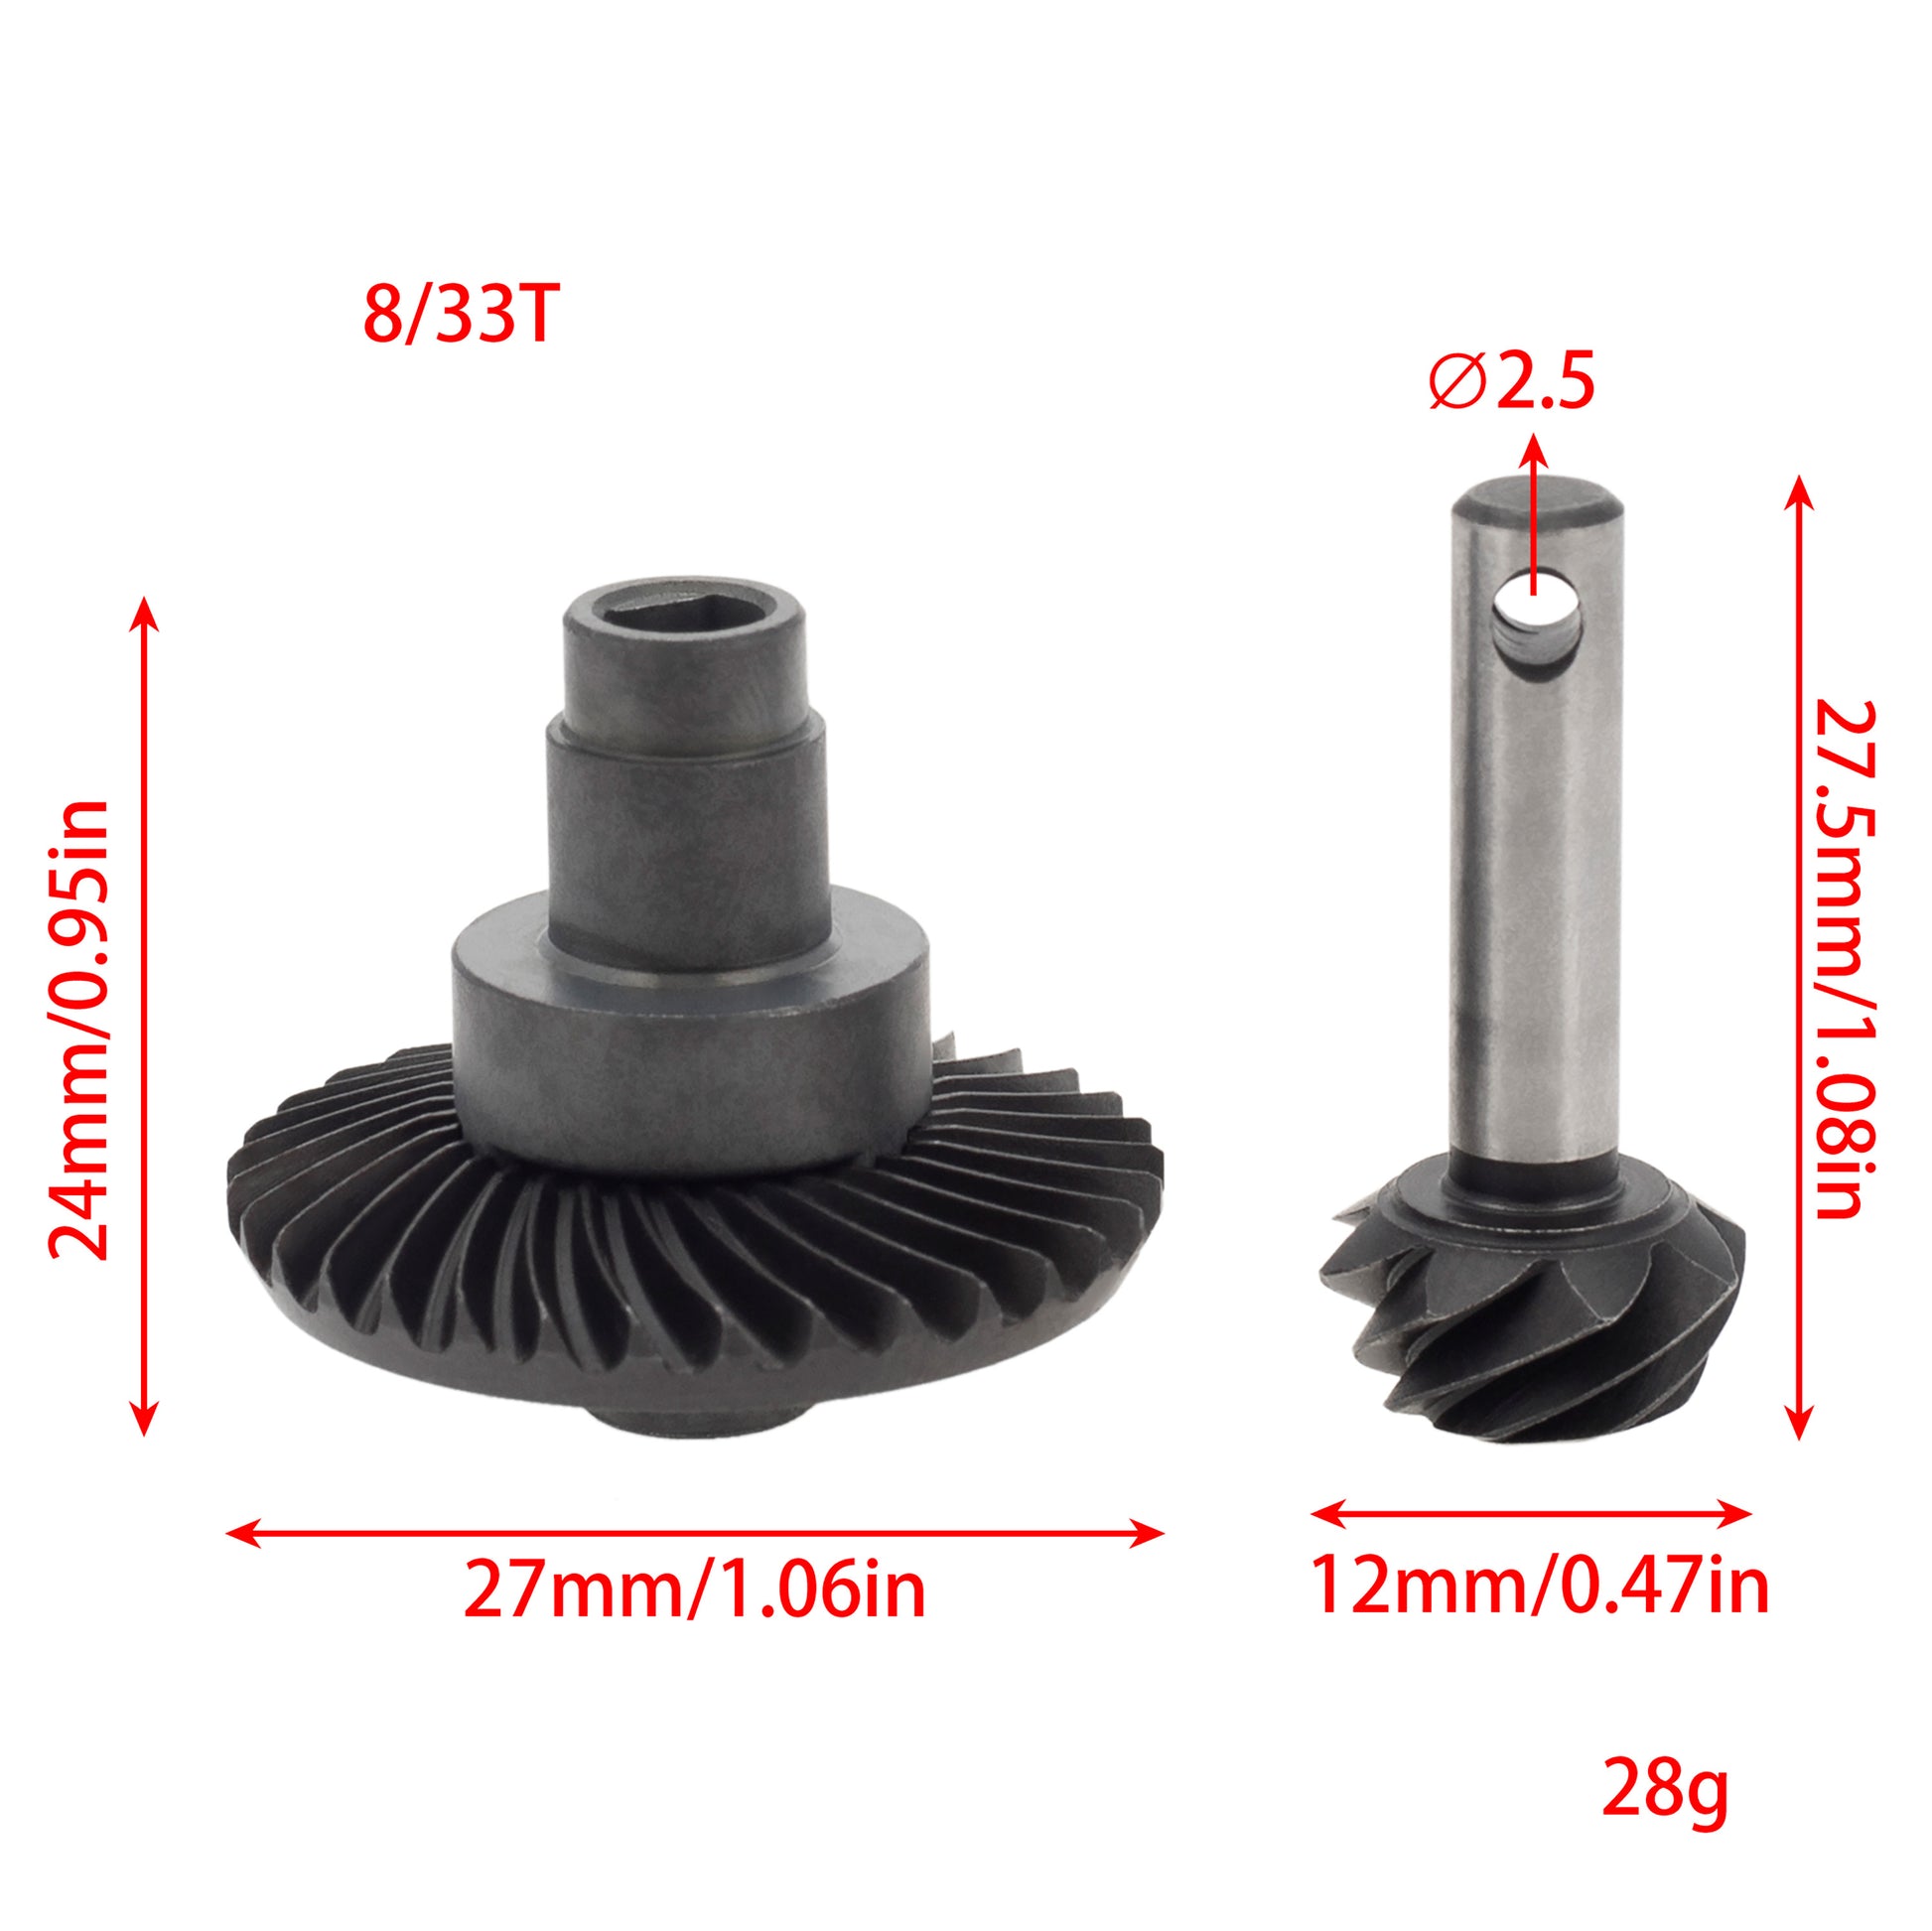 8-33T underdrive diff gear size